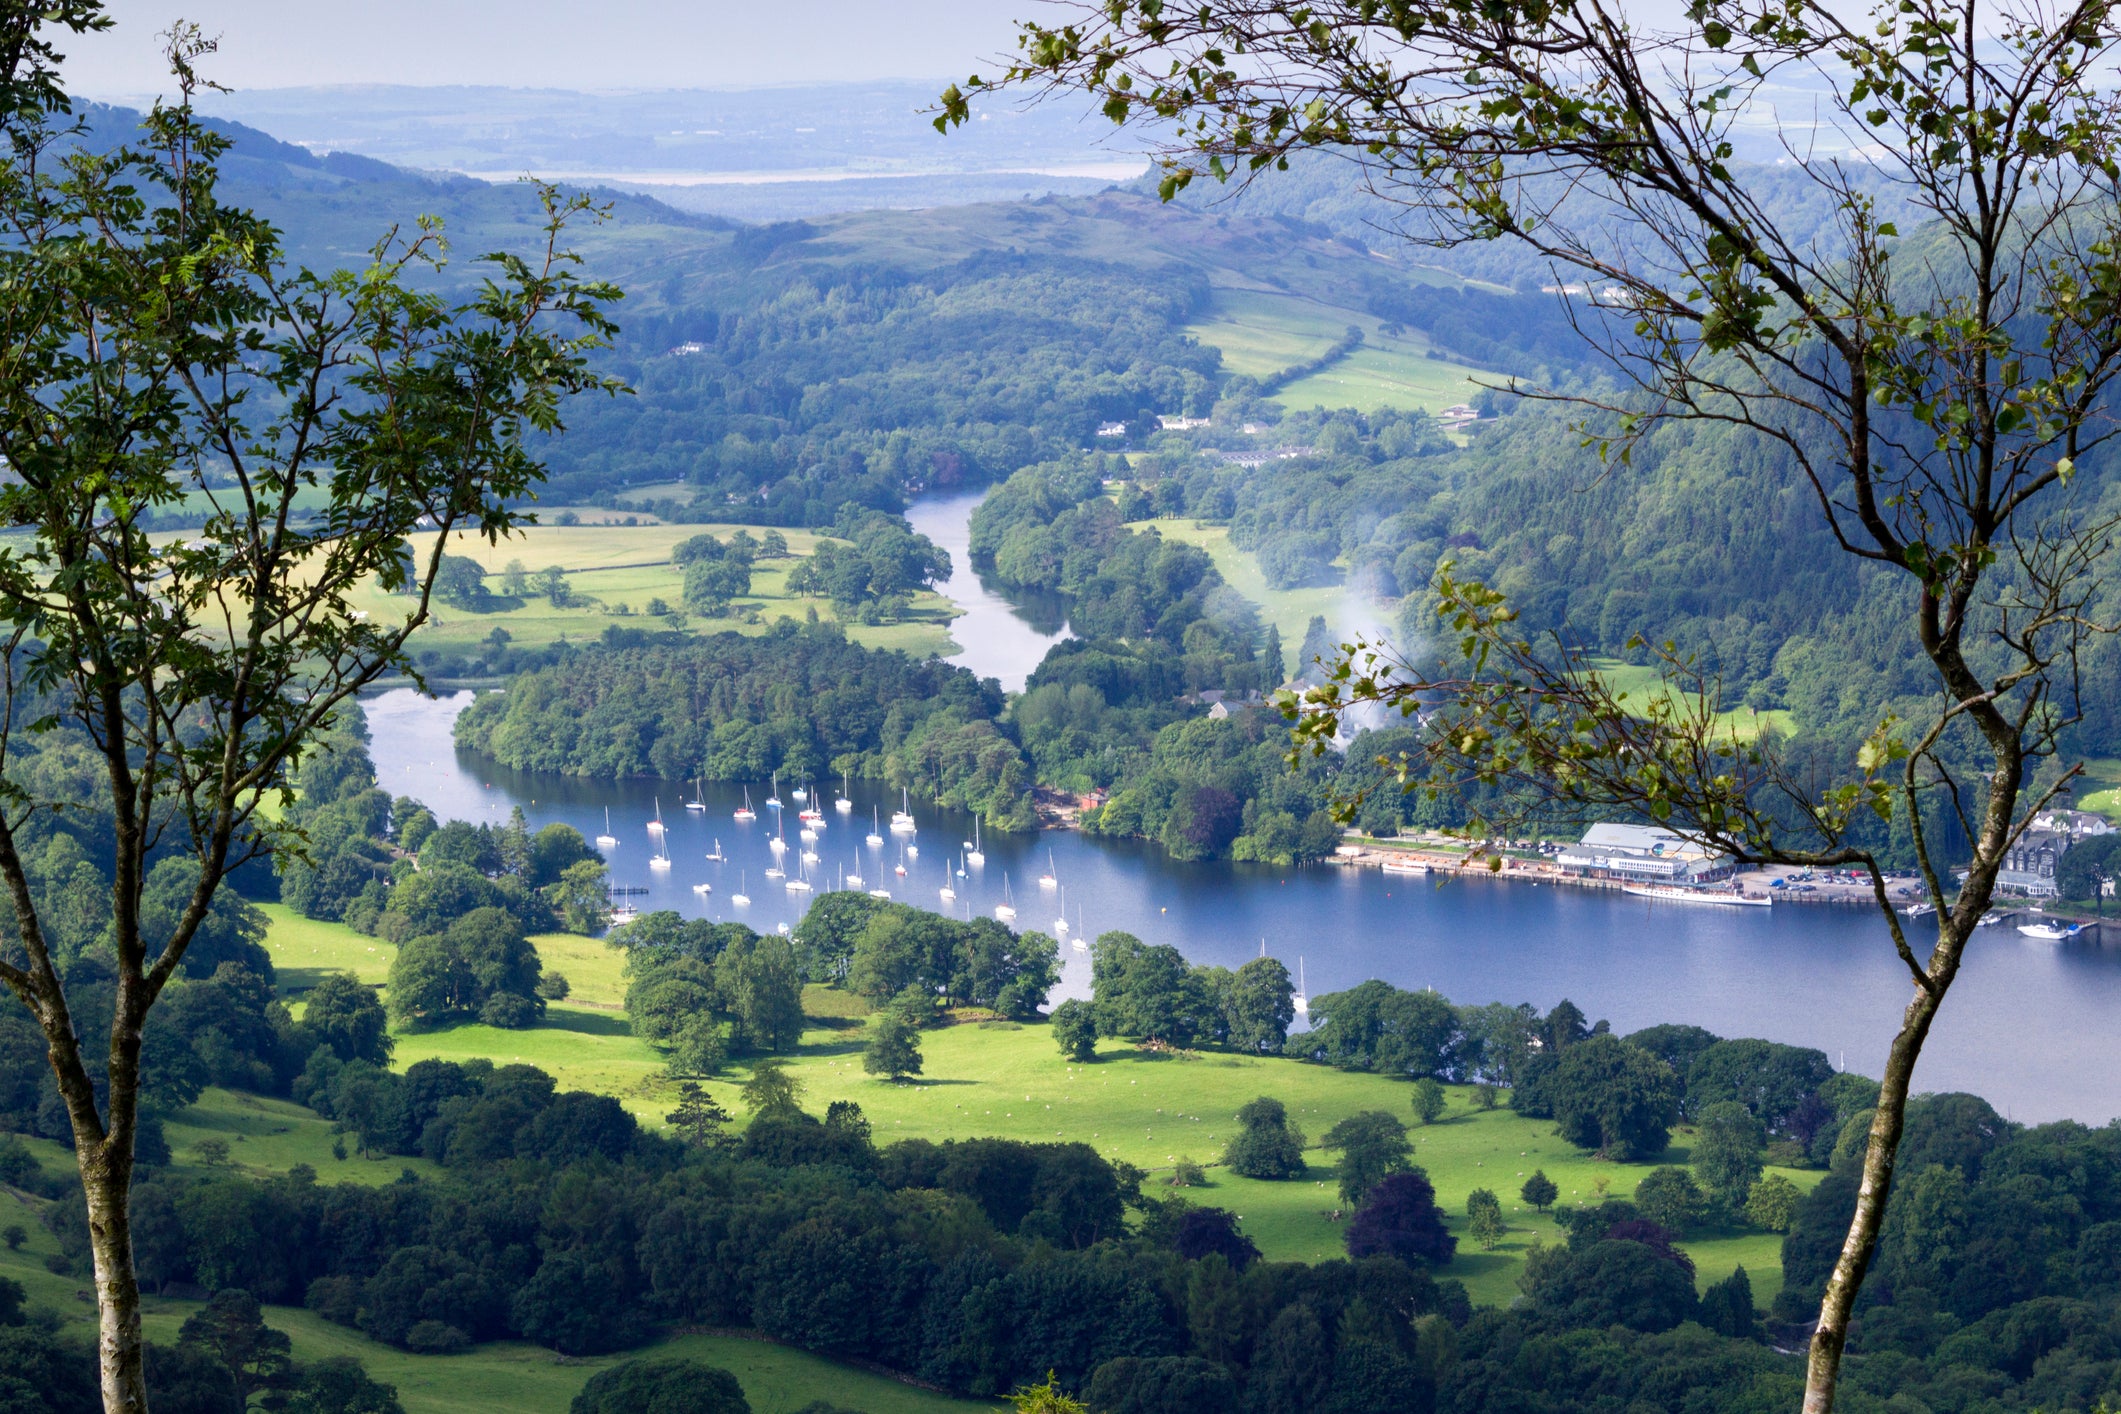 Lake Windermere is the largest lake in England